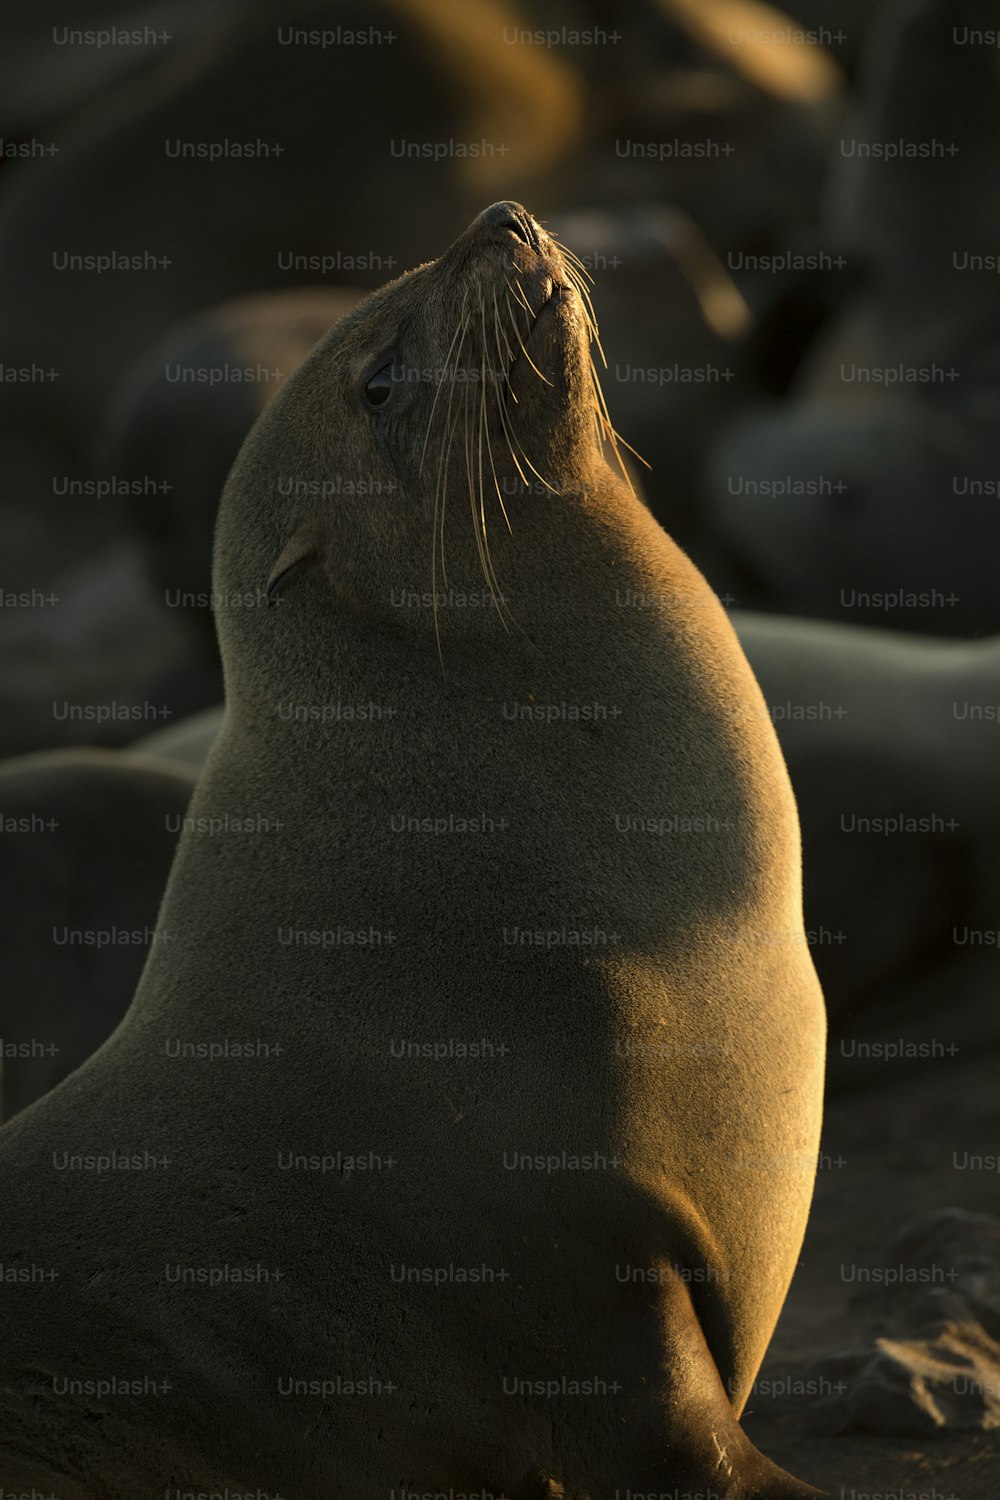 A Seal in the Cape Cross Seal Colony, Namibia.